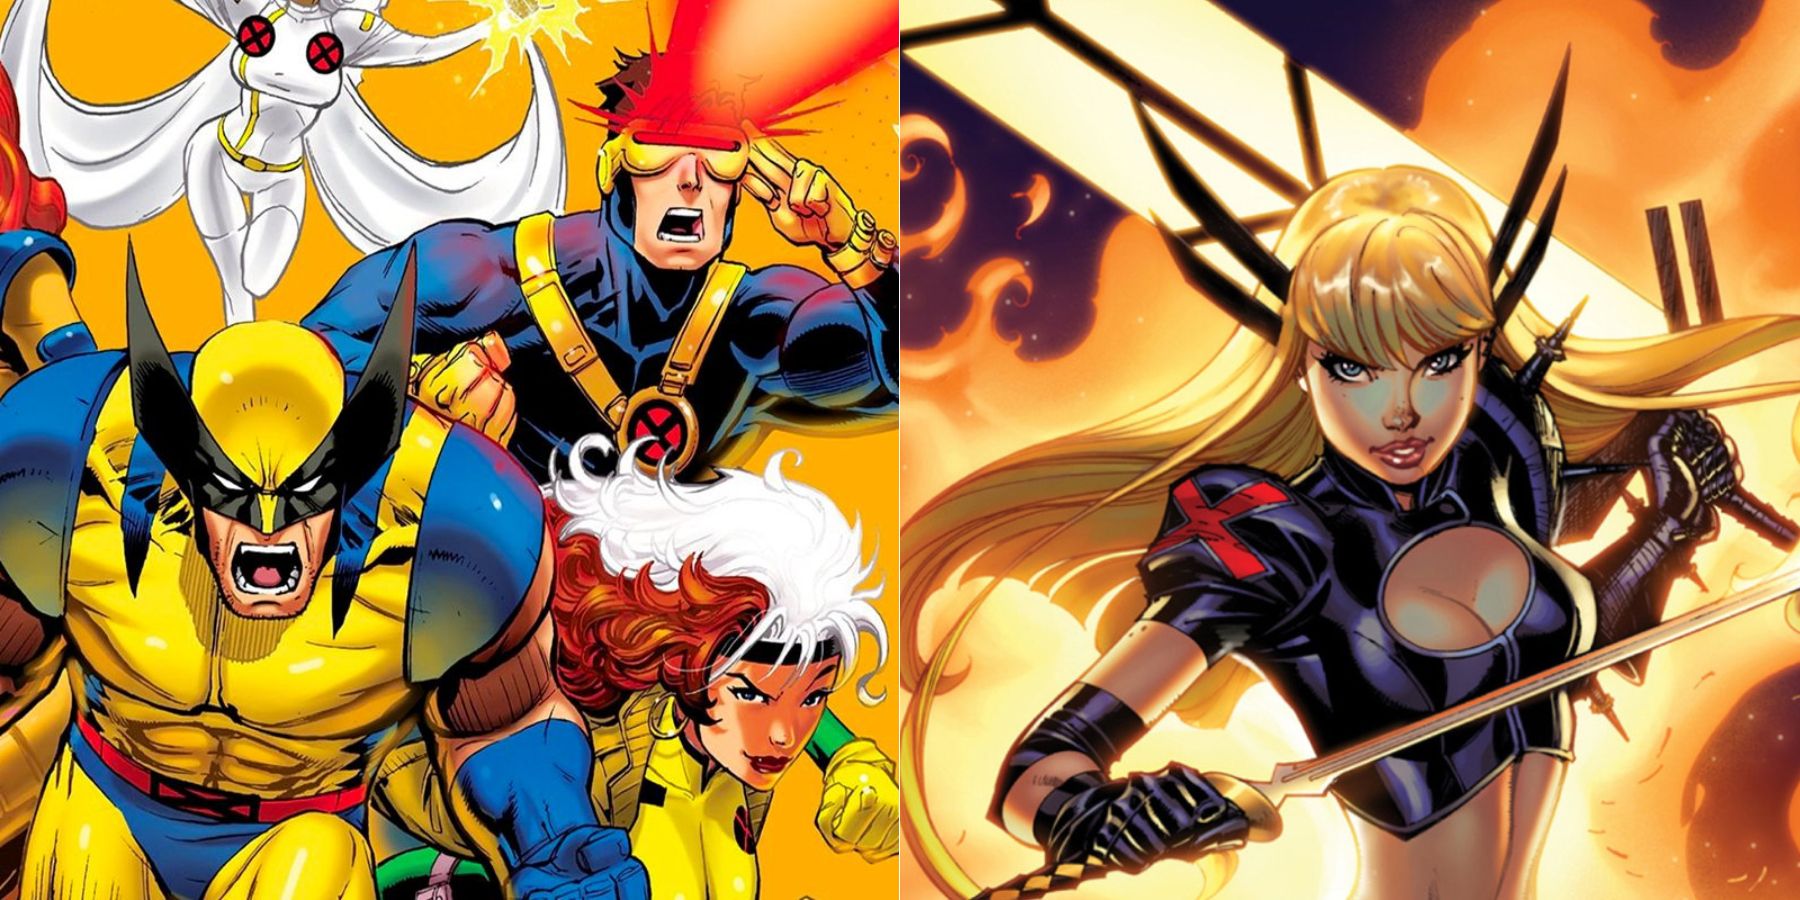 X-Men '97: 5 Characters We Want To See In The New Cartoon